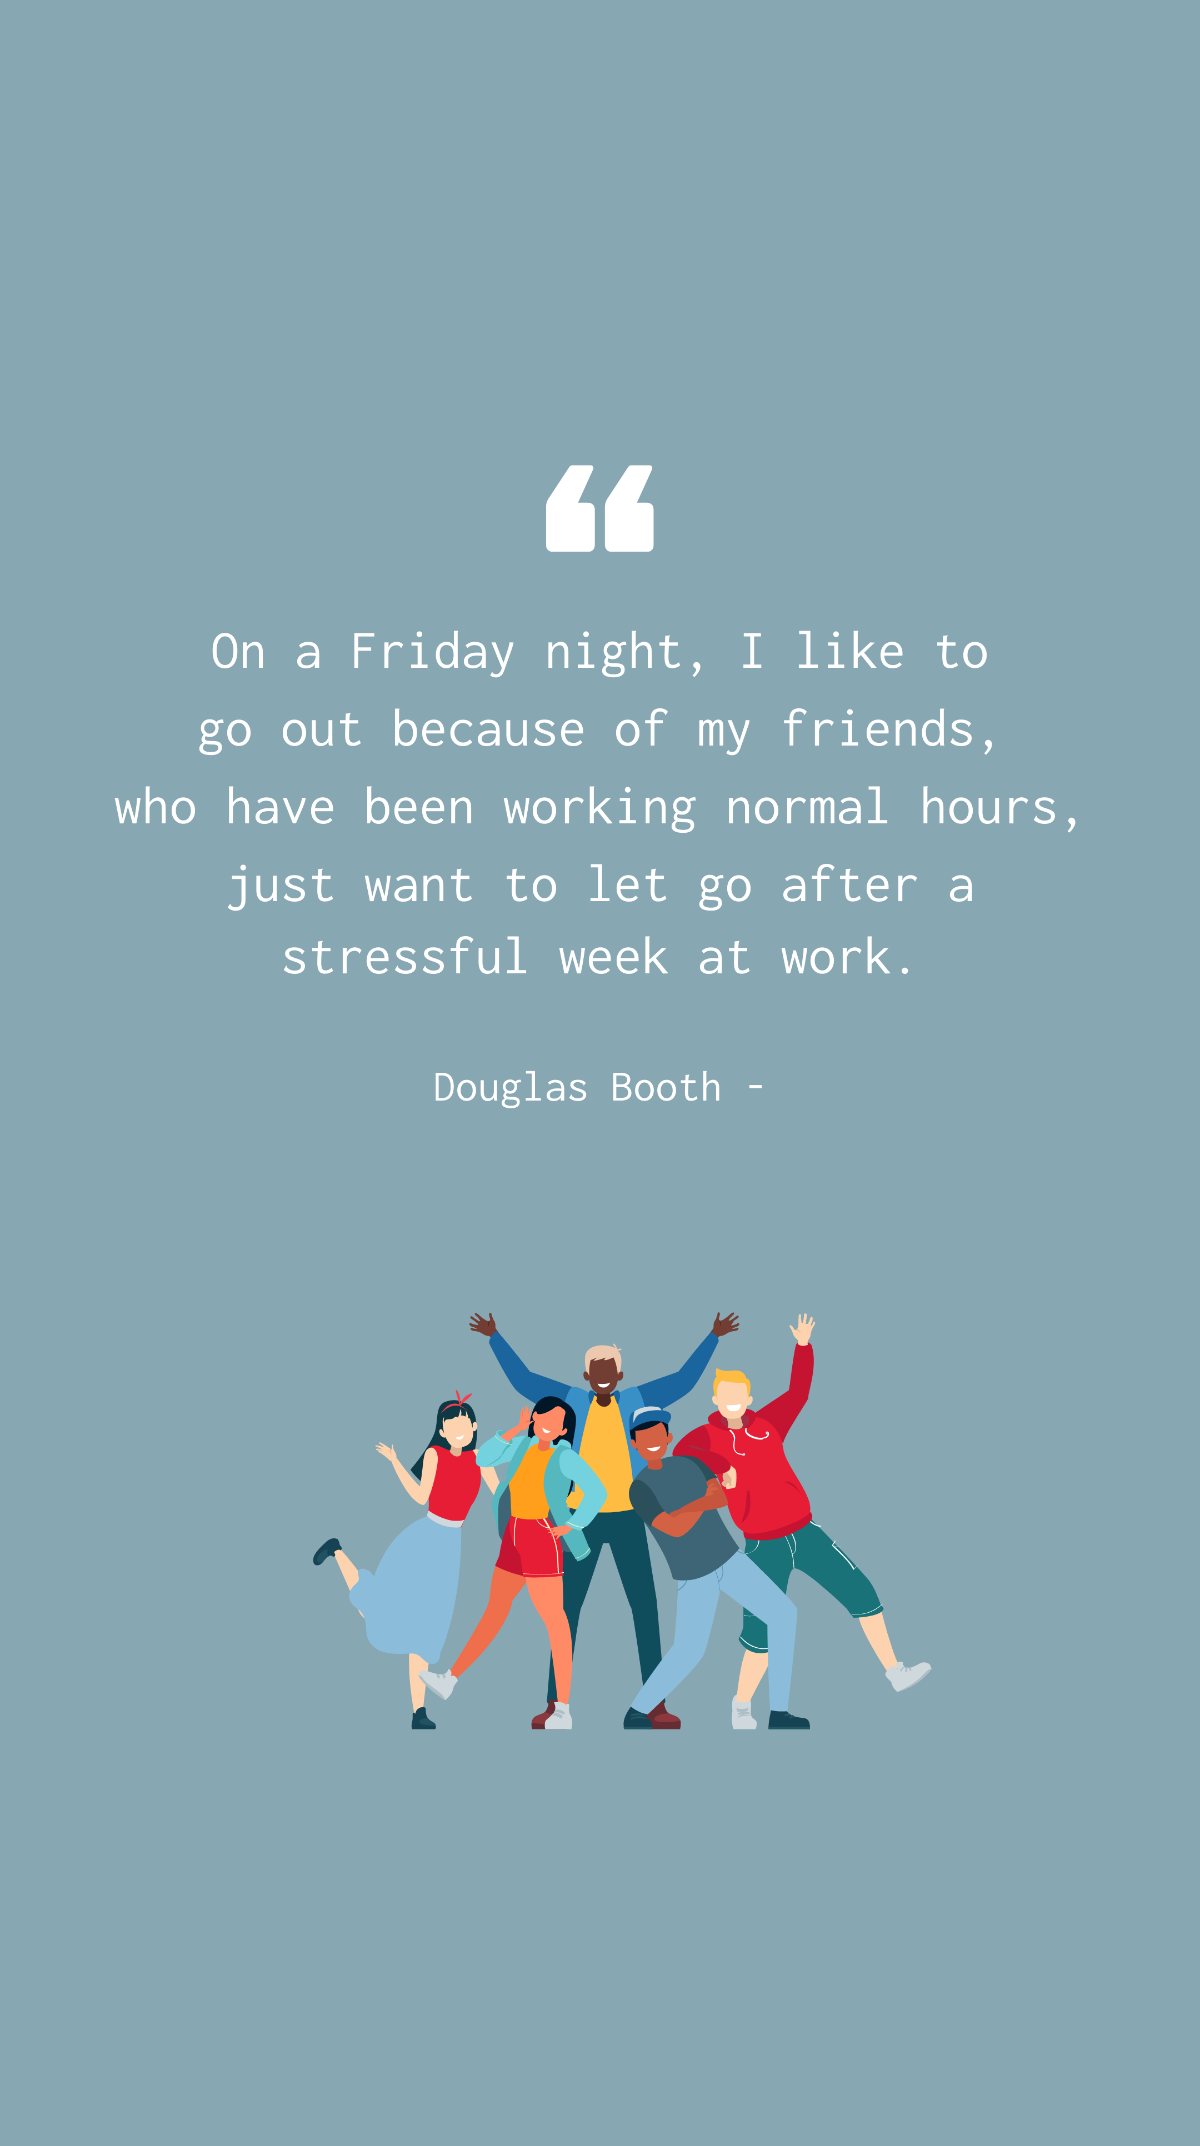 Douglas Booth - On a Friday night, I like to go out because of my friends, who have been working normal hours, just want to let go after a stressful week at work. Template